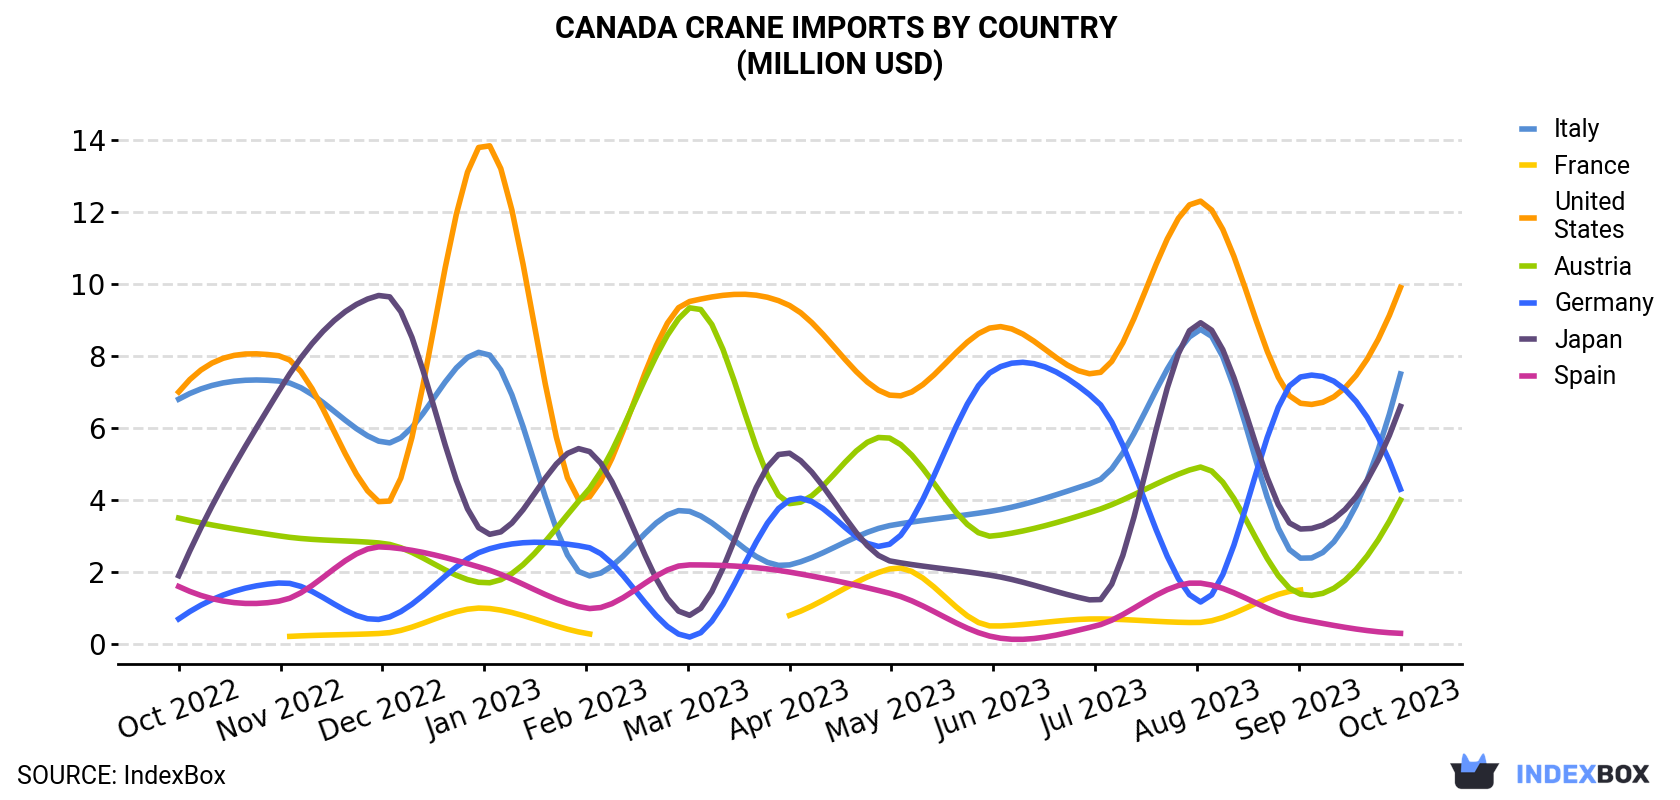 Canada Crane Imports By Country (Million USD)